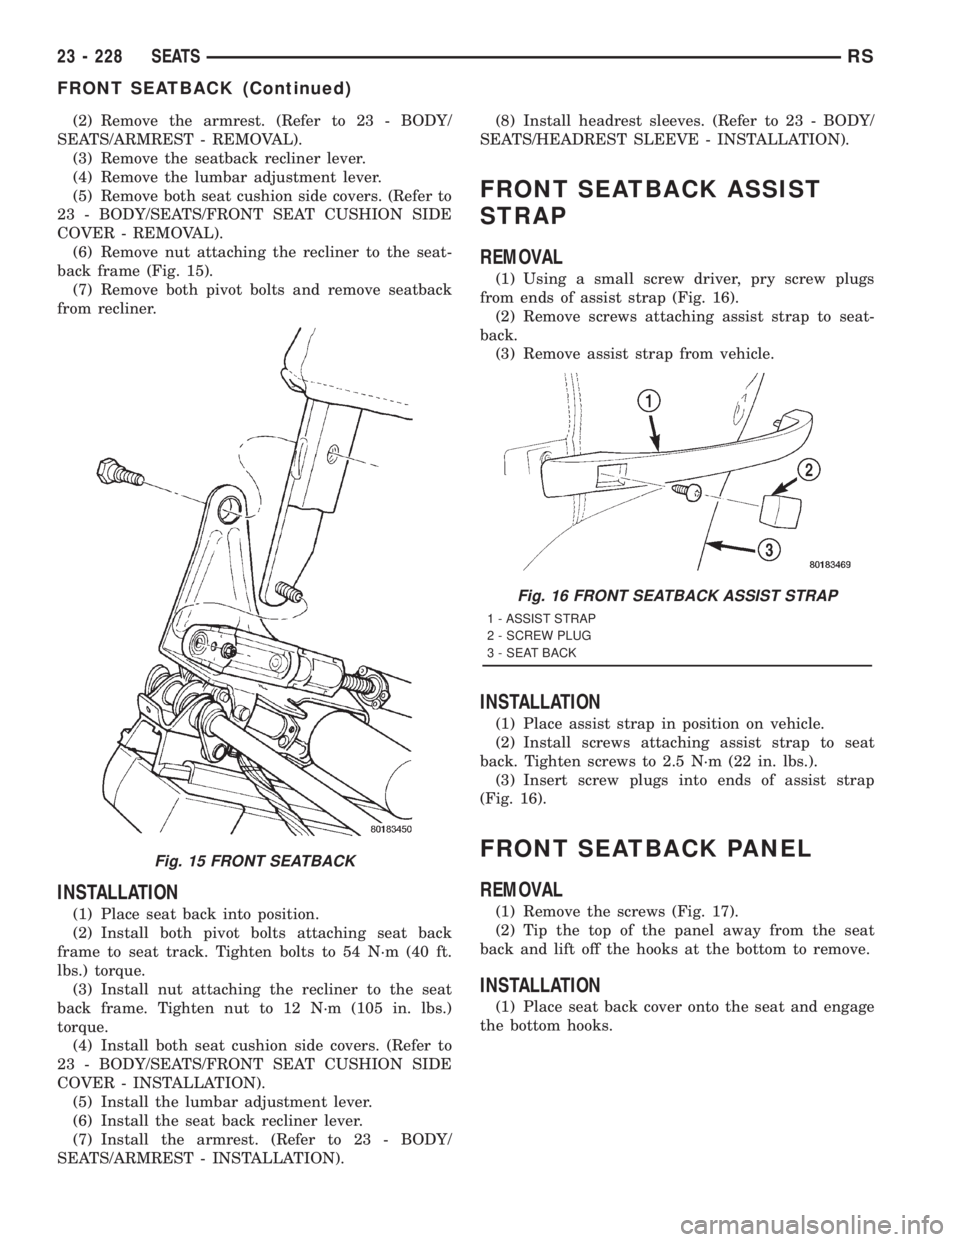 CHRYSLER VOYAGER 2001  Service Manual (2) Remove the armrest. (Refer to 23 - BODY/
SEATS/ARMREST - REMOVAL).
(3) Remove the seatback recliner lever.
(4) Remove the lumbar adjustment lever.
(5) Remove both seat cushion side covers. (Refer 